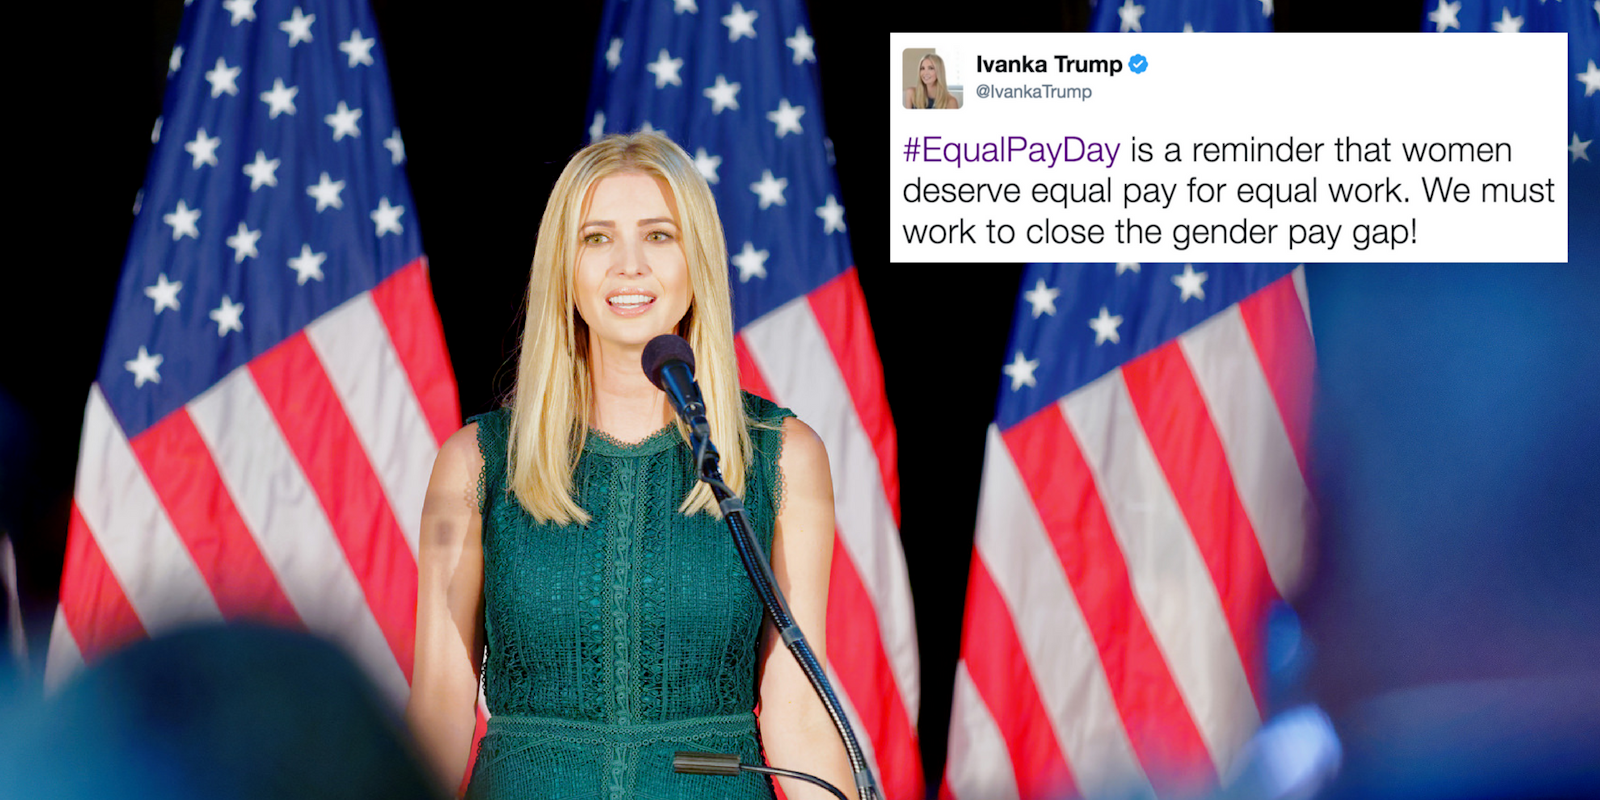 Ivanka Trump tweeted a message on Equal Pay Day.